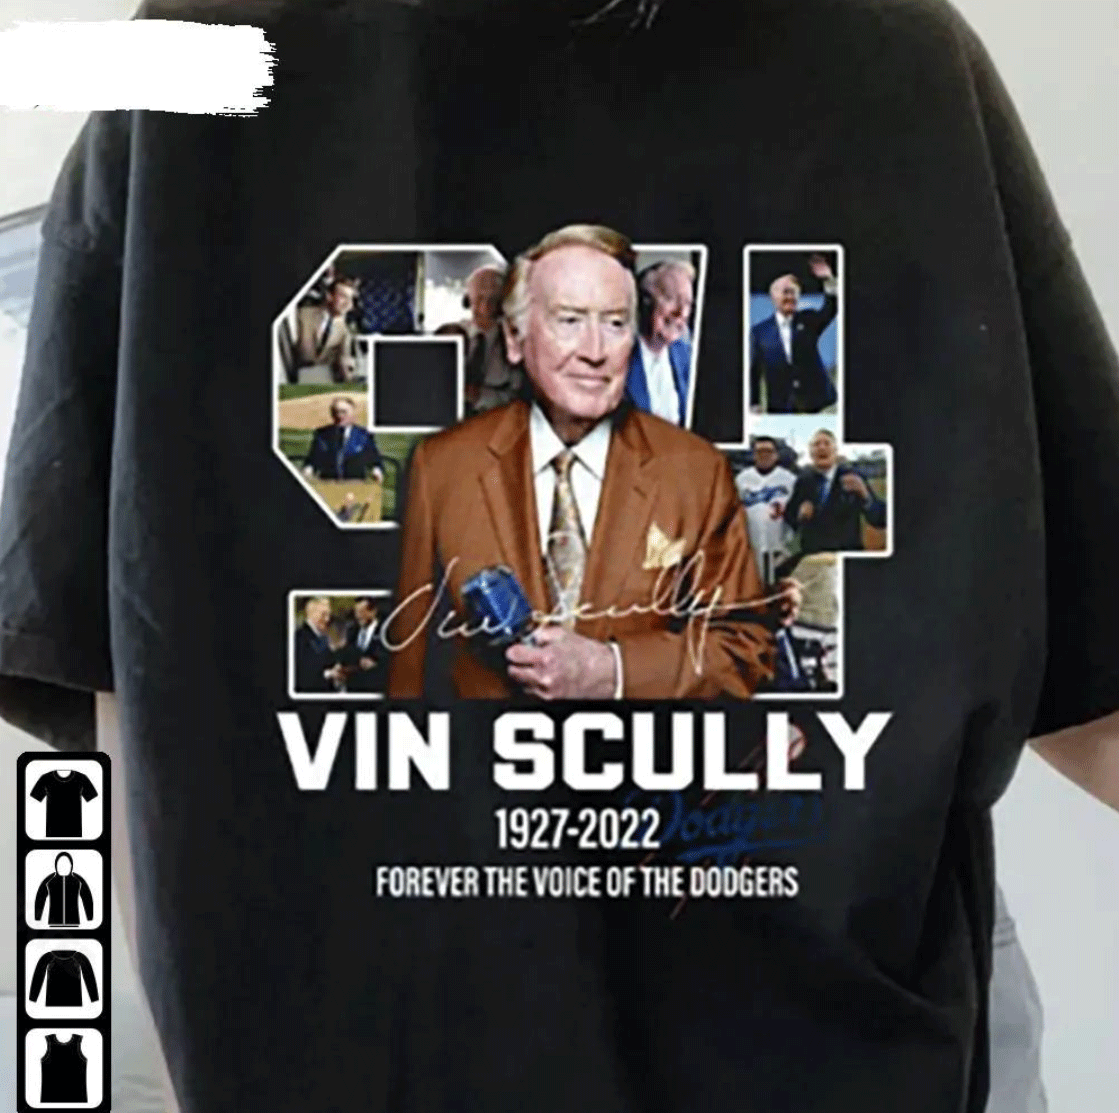 Rip Vin Scully Legendary Dodgers 1927-2022 T-Shirt